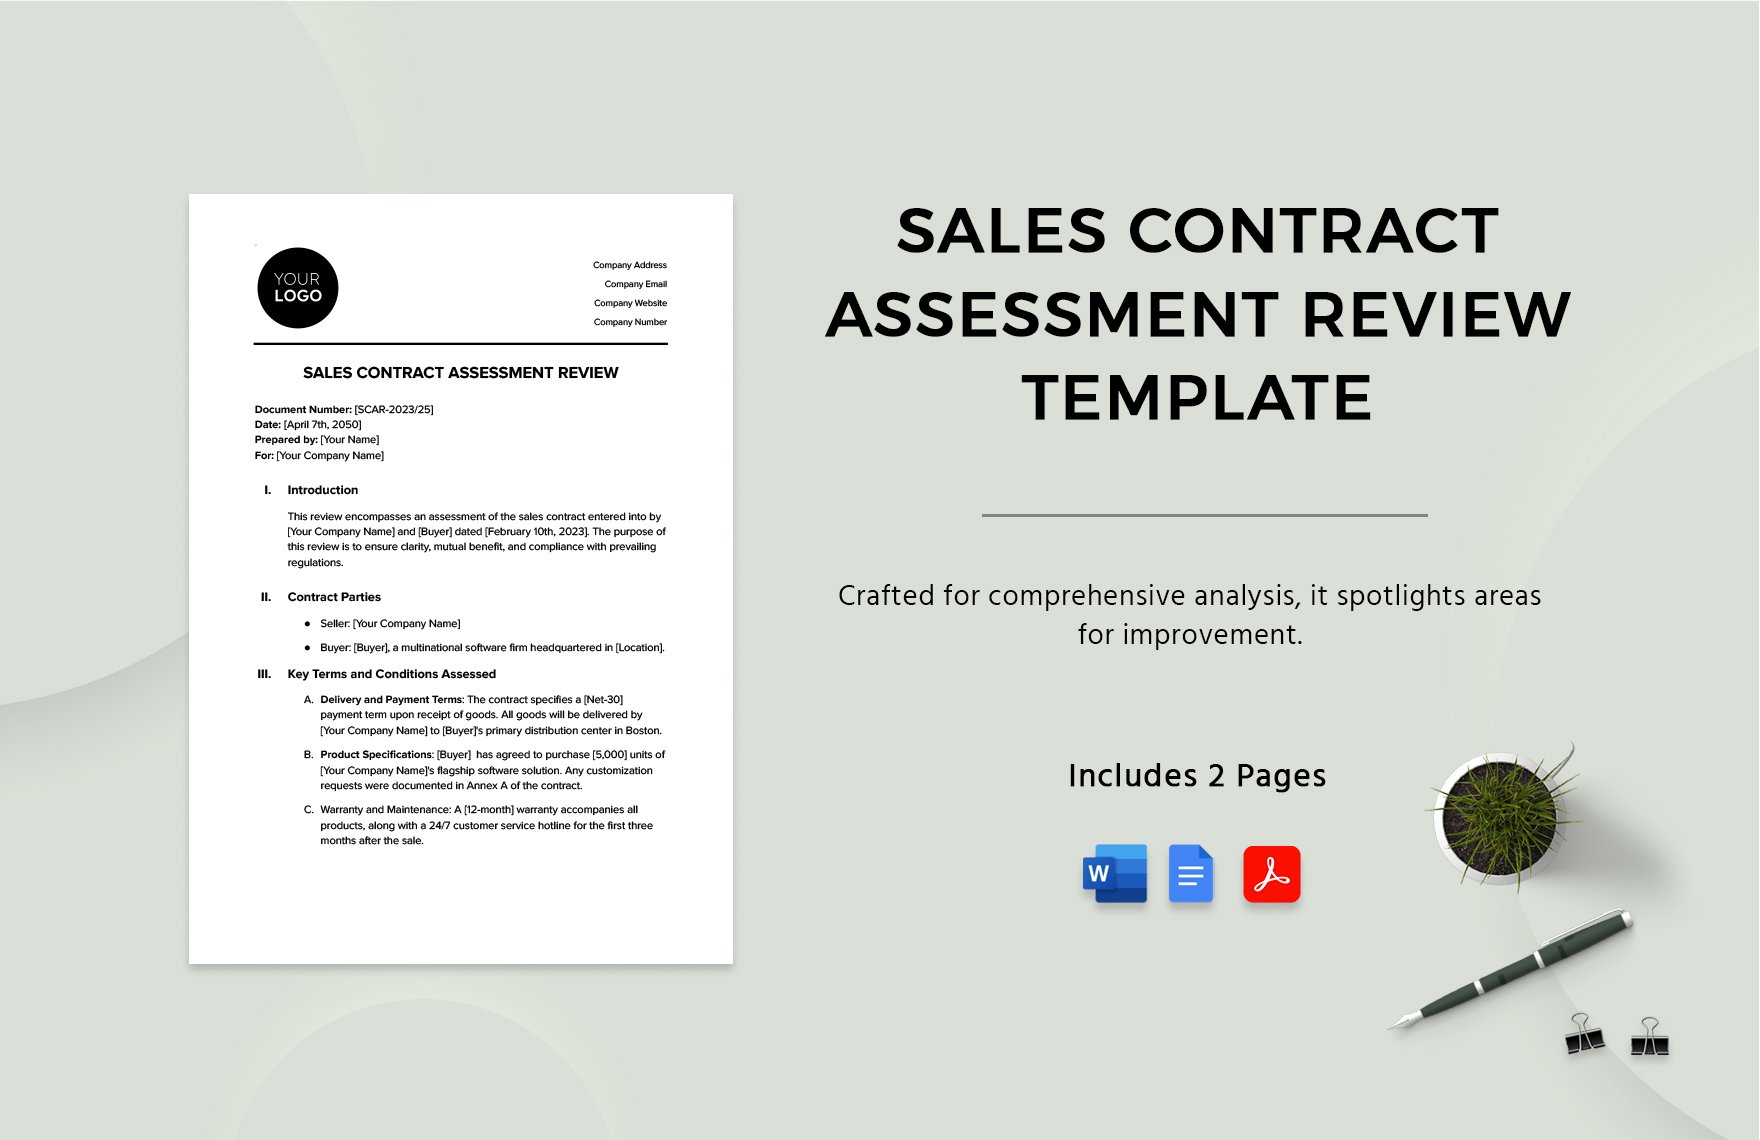 Sales Contract Assessment Review Template in Word, Google Docs, PDF